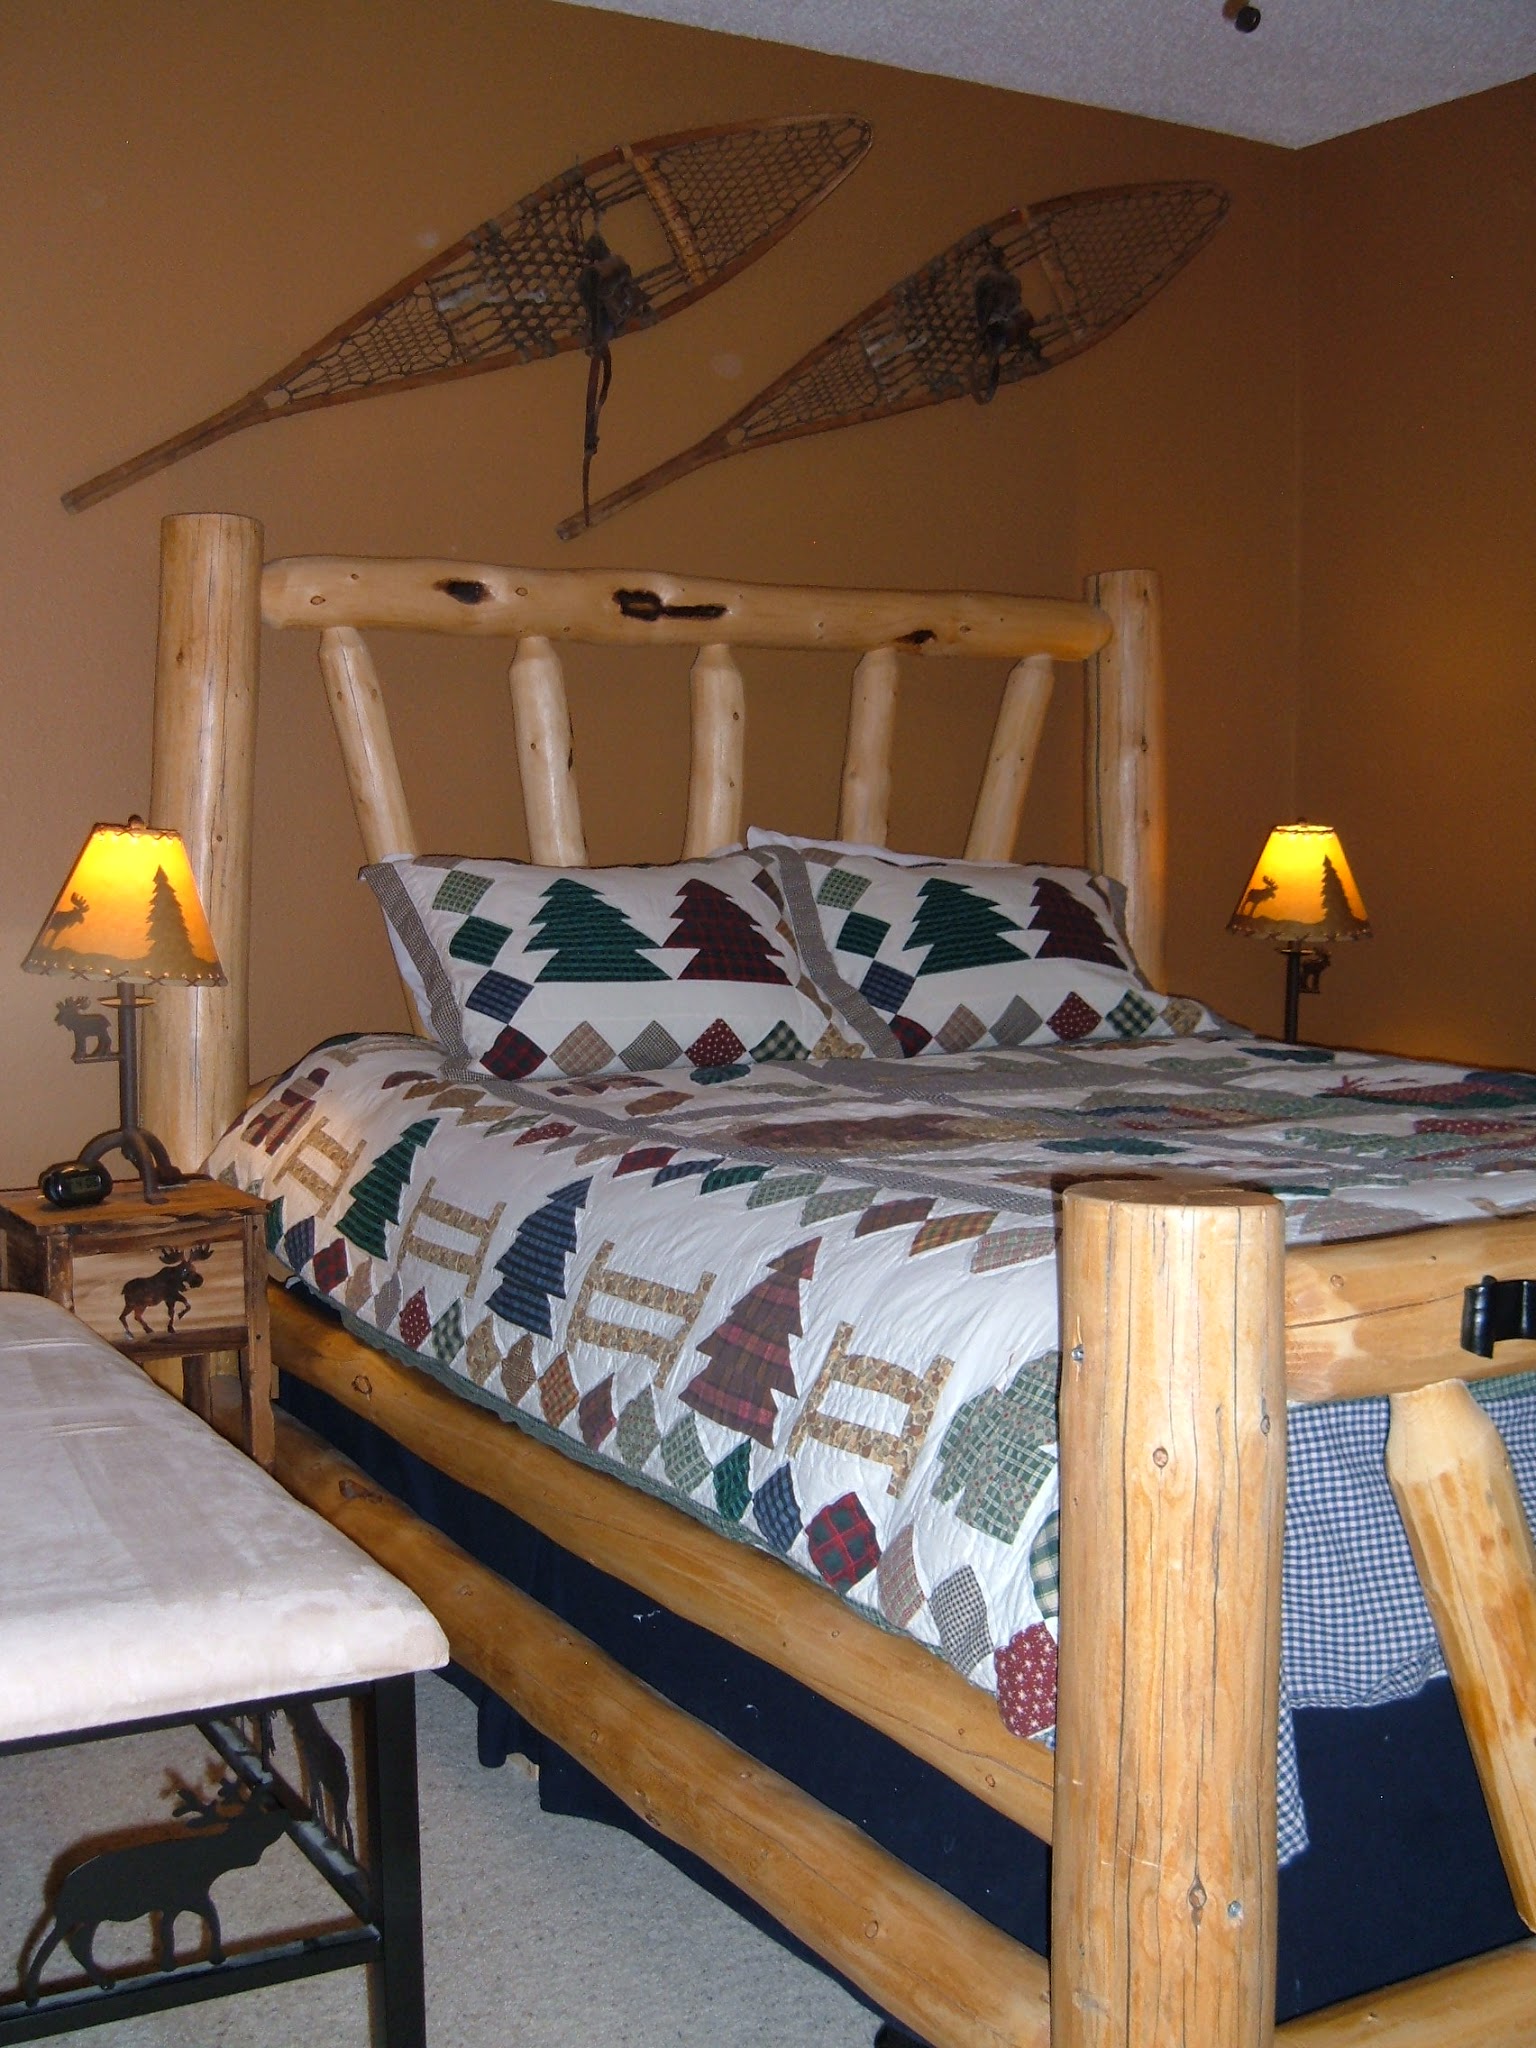 Bedroom with a log bed, down comforter, brown walls, snowshoes hanging on the wall, with beige carpet.  Moose theme bedside lamps and tables.